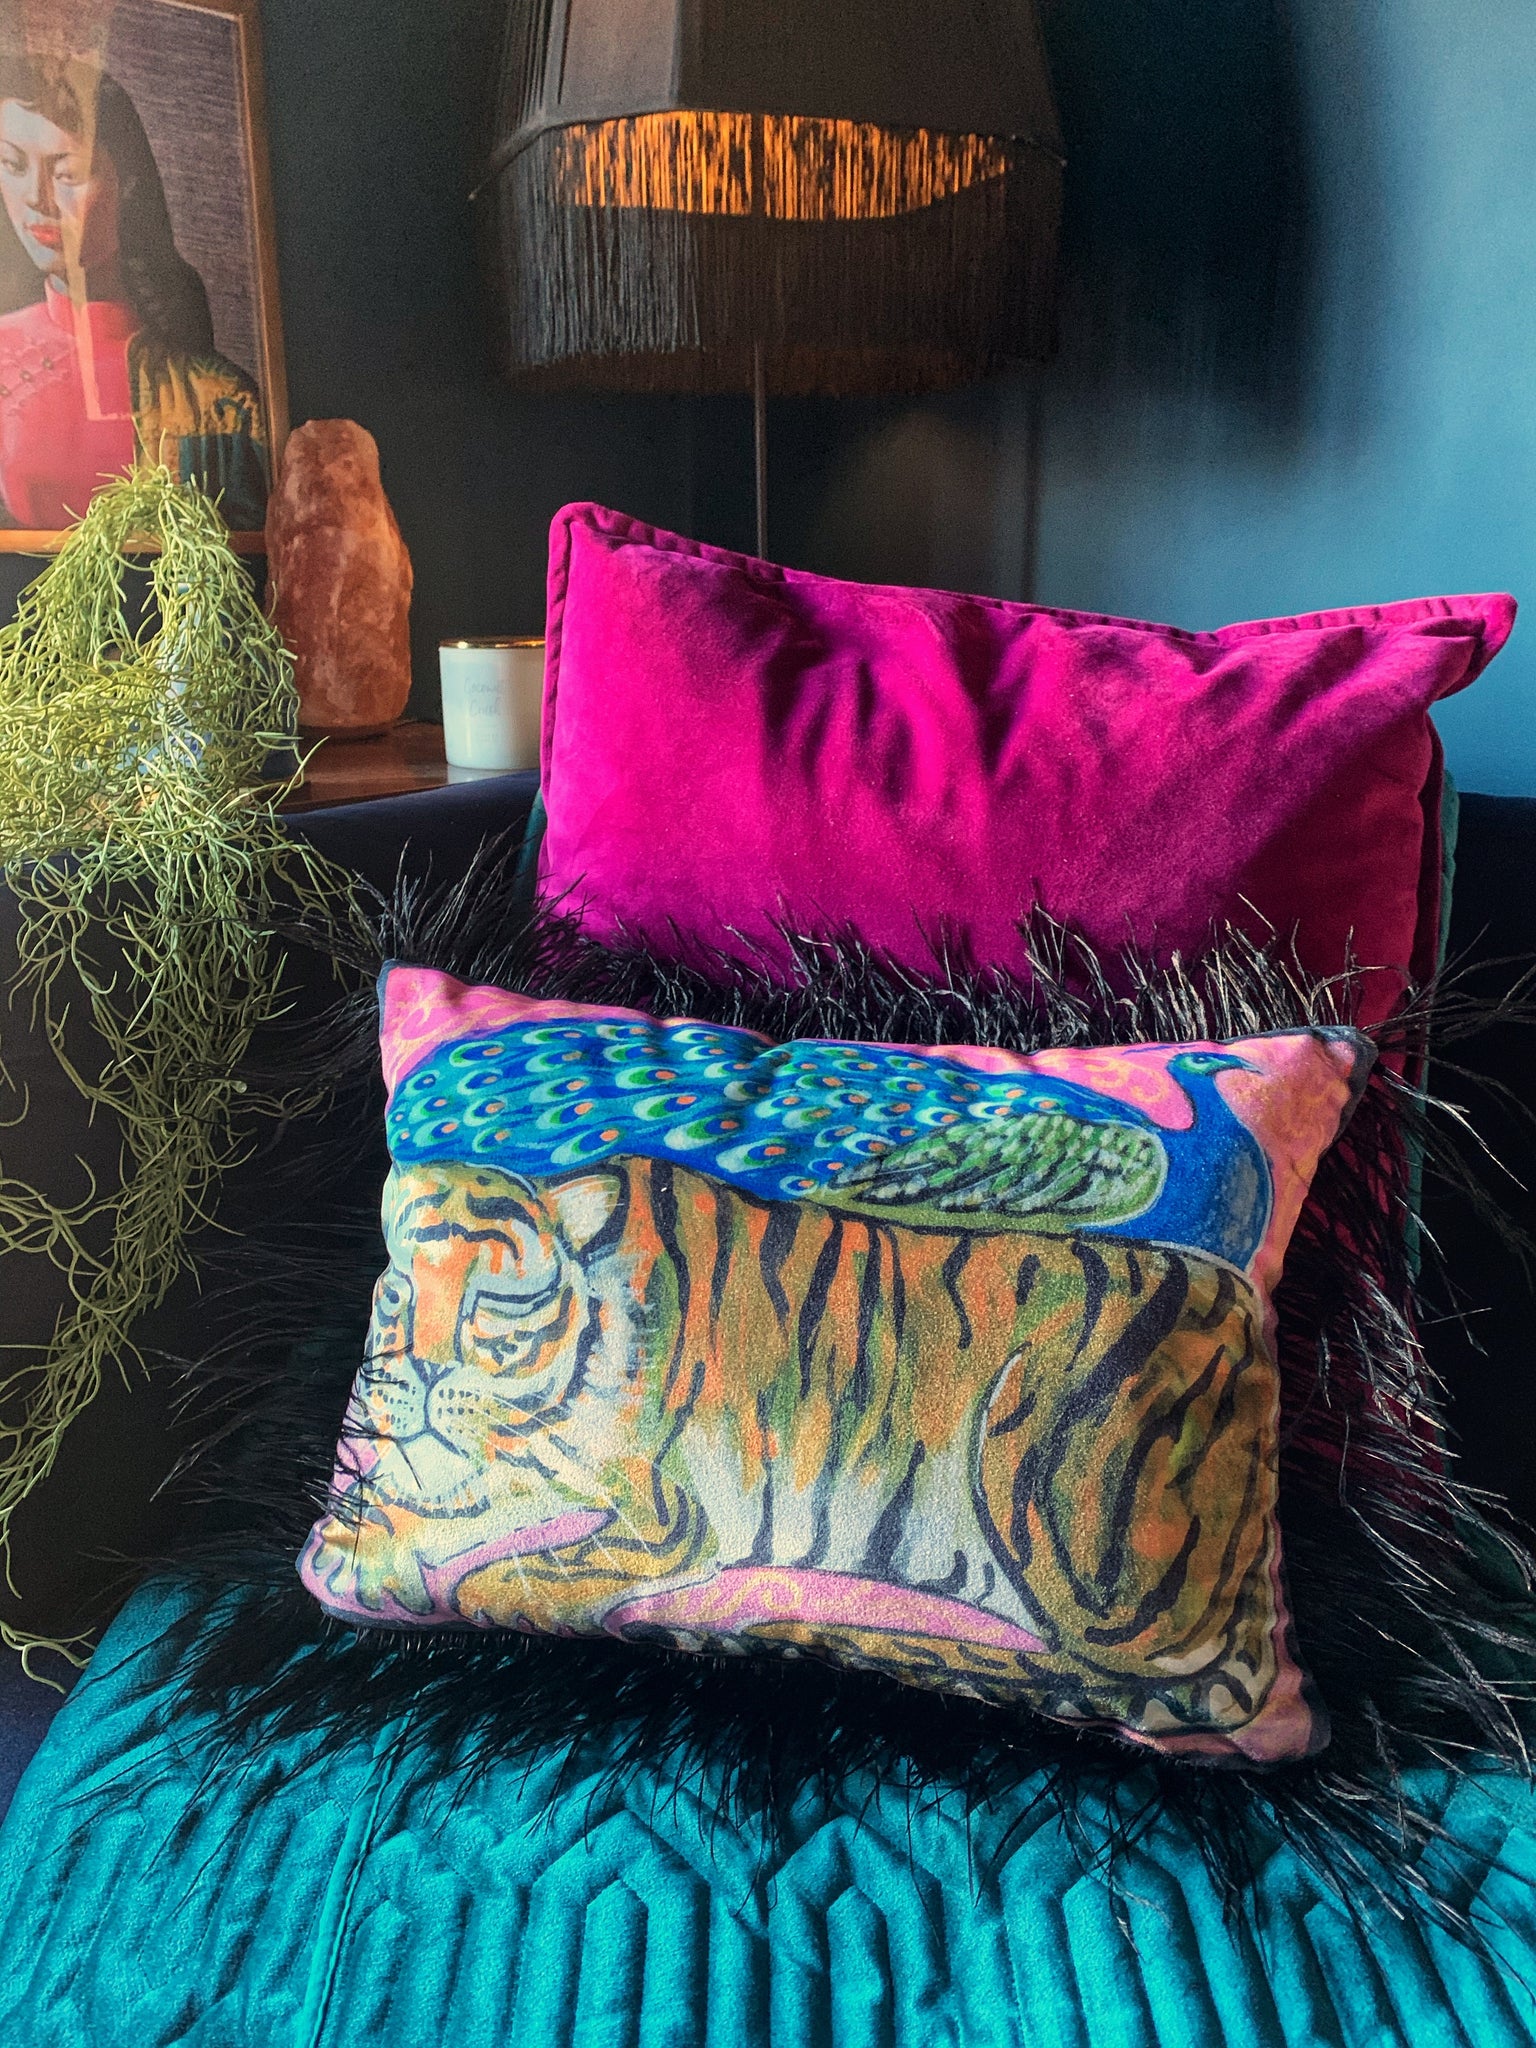 The tiger and the peacock cushion